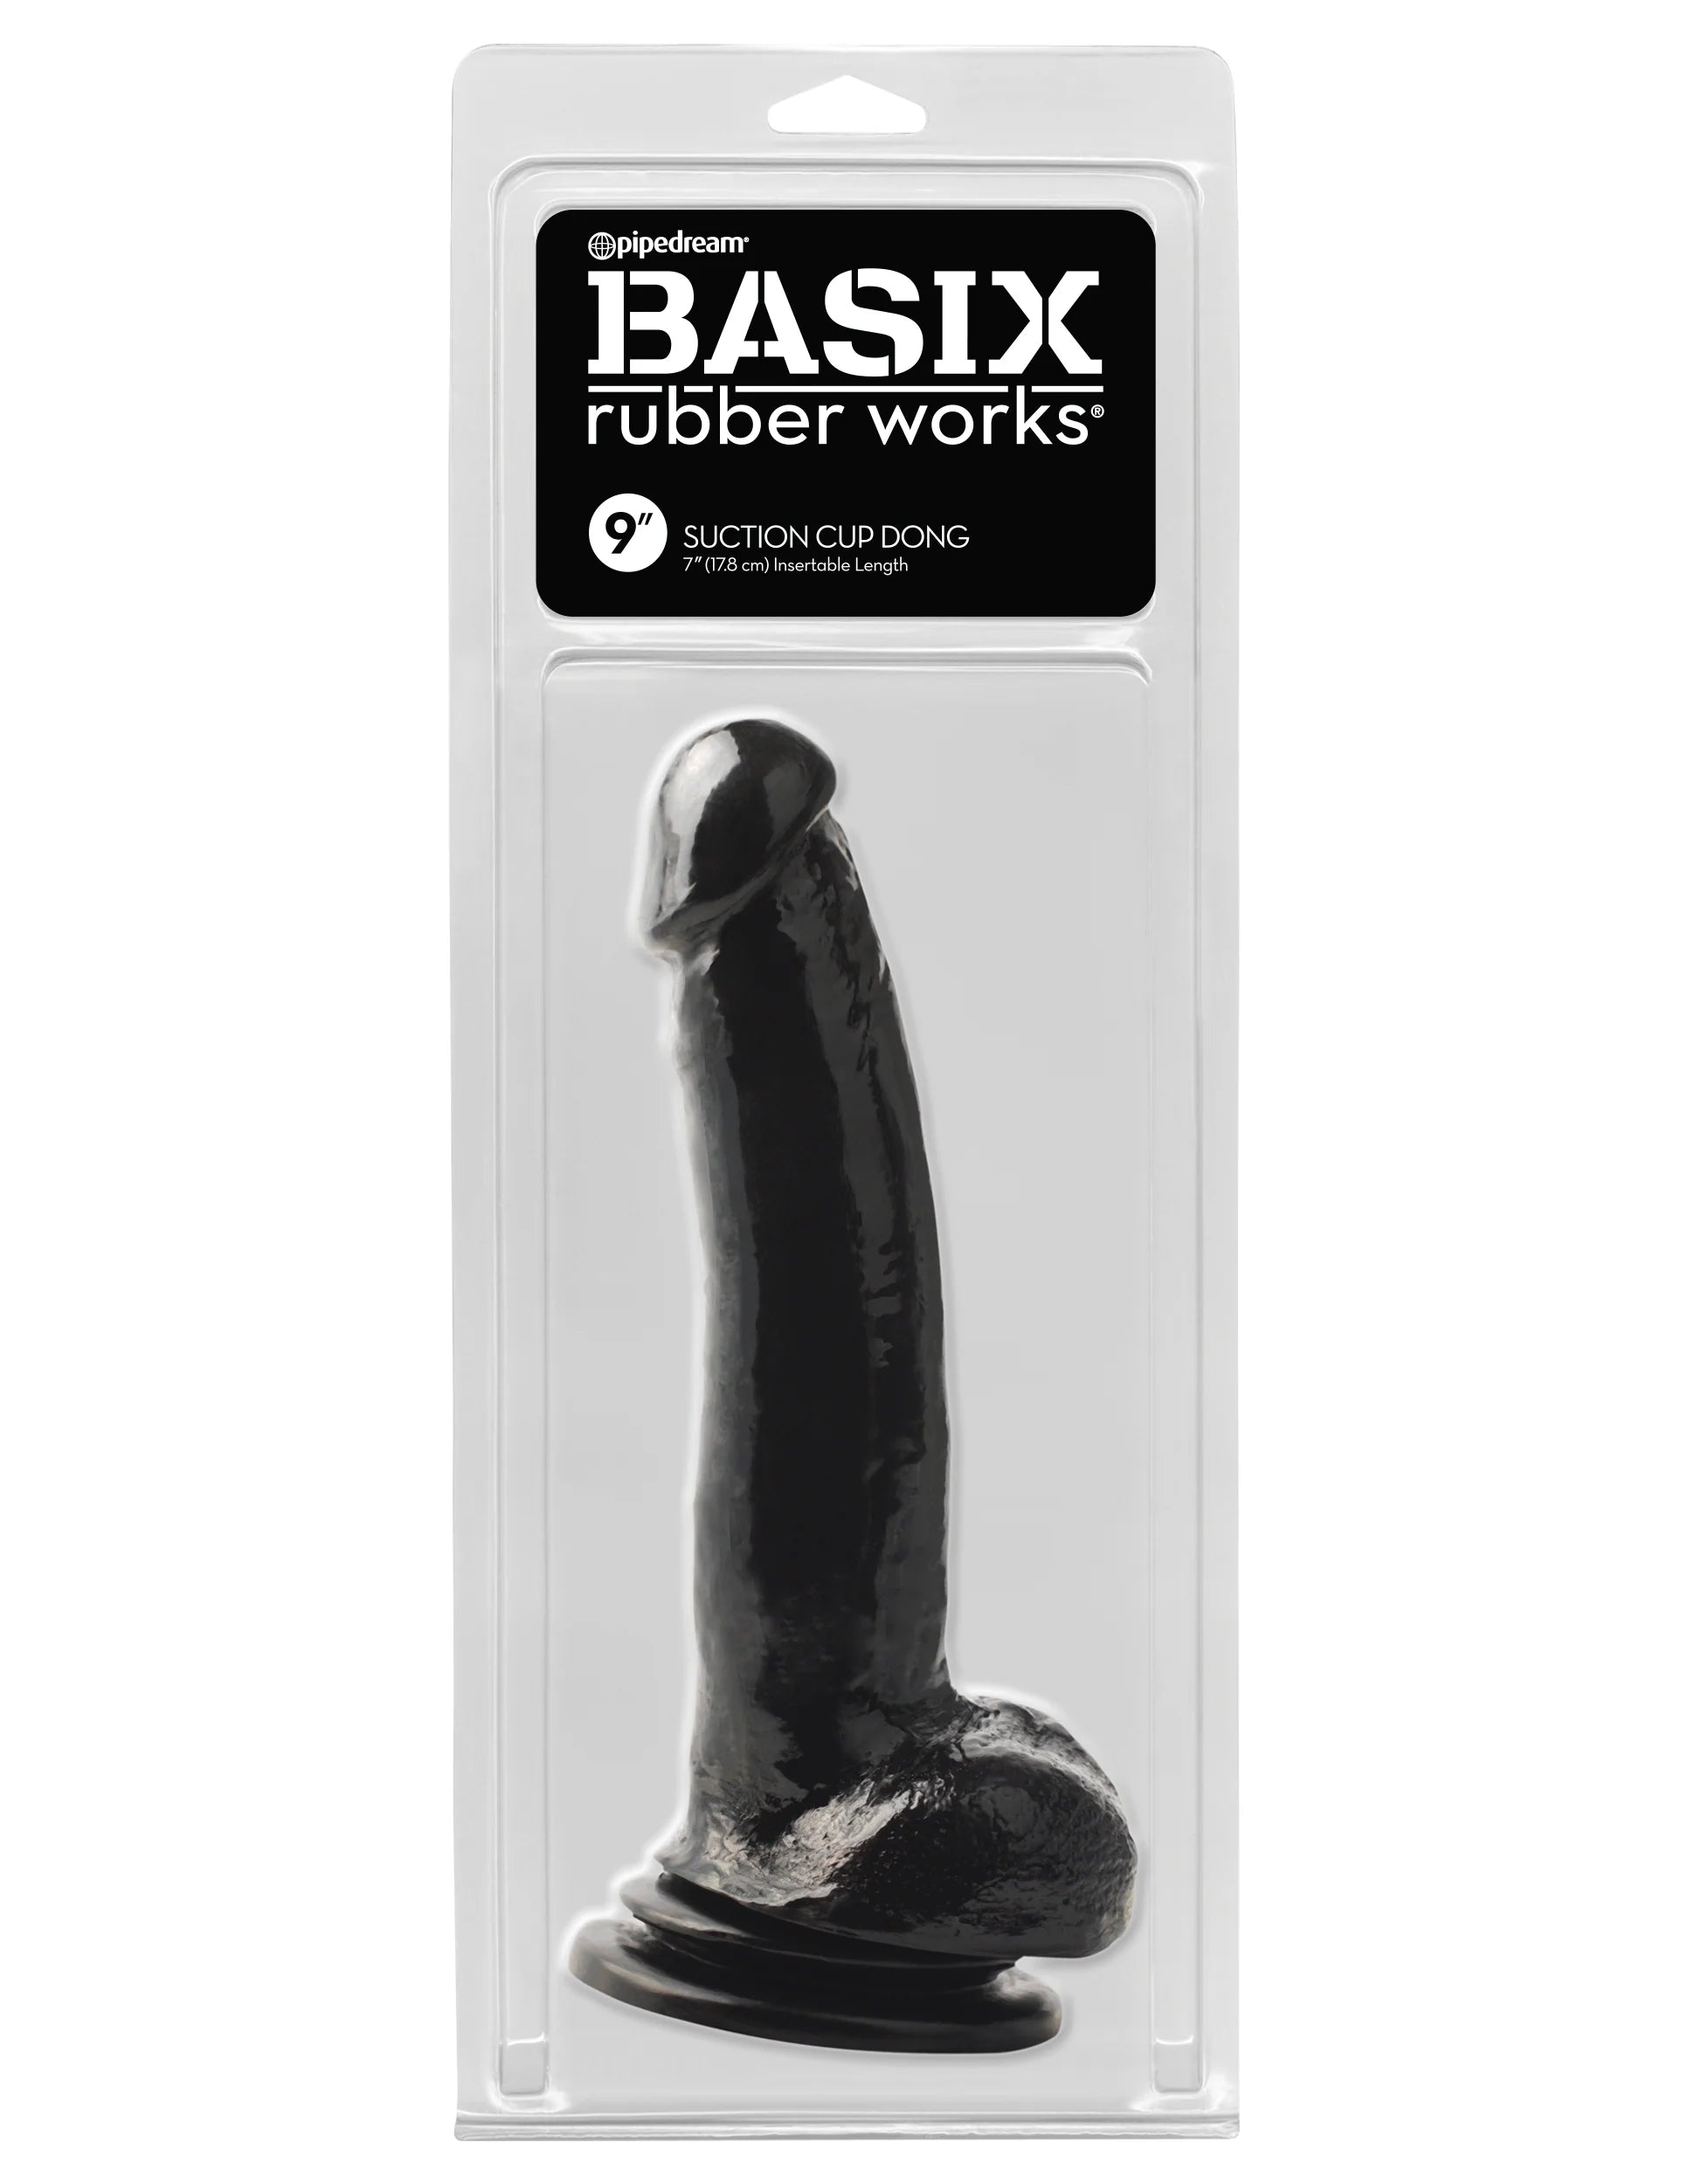 Pipedream Basix Rubber Works Suction Cup Dong 9in